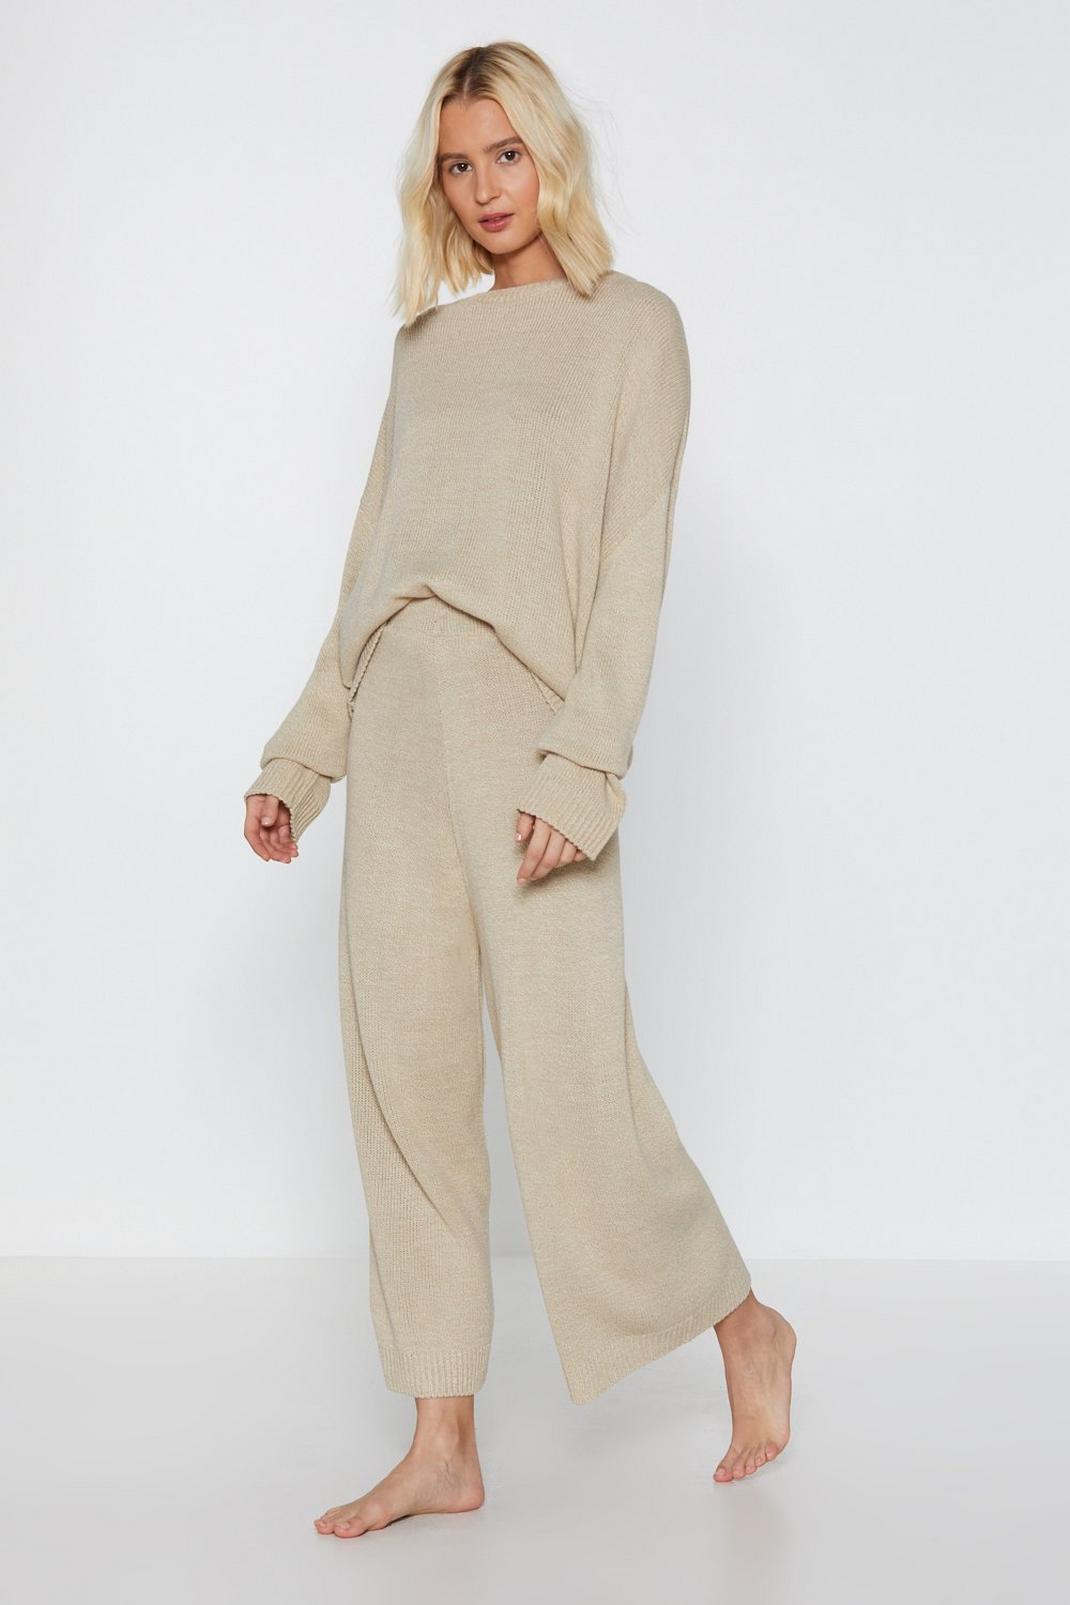 https://media.nastygal.com/i/nastygal/agg57128_oatmeal_xl/female-oatmeal-you've-met-your-match-knitted-lounge-set/?w=1070&qlt=default&fmt.jp2.qlt=70&fmt=auto&sm=fit